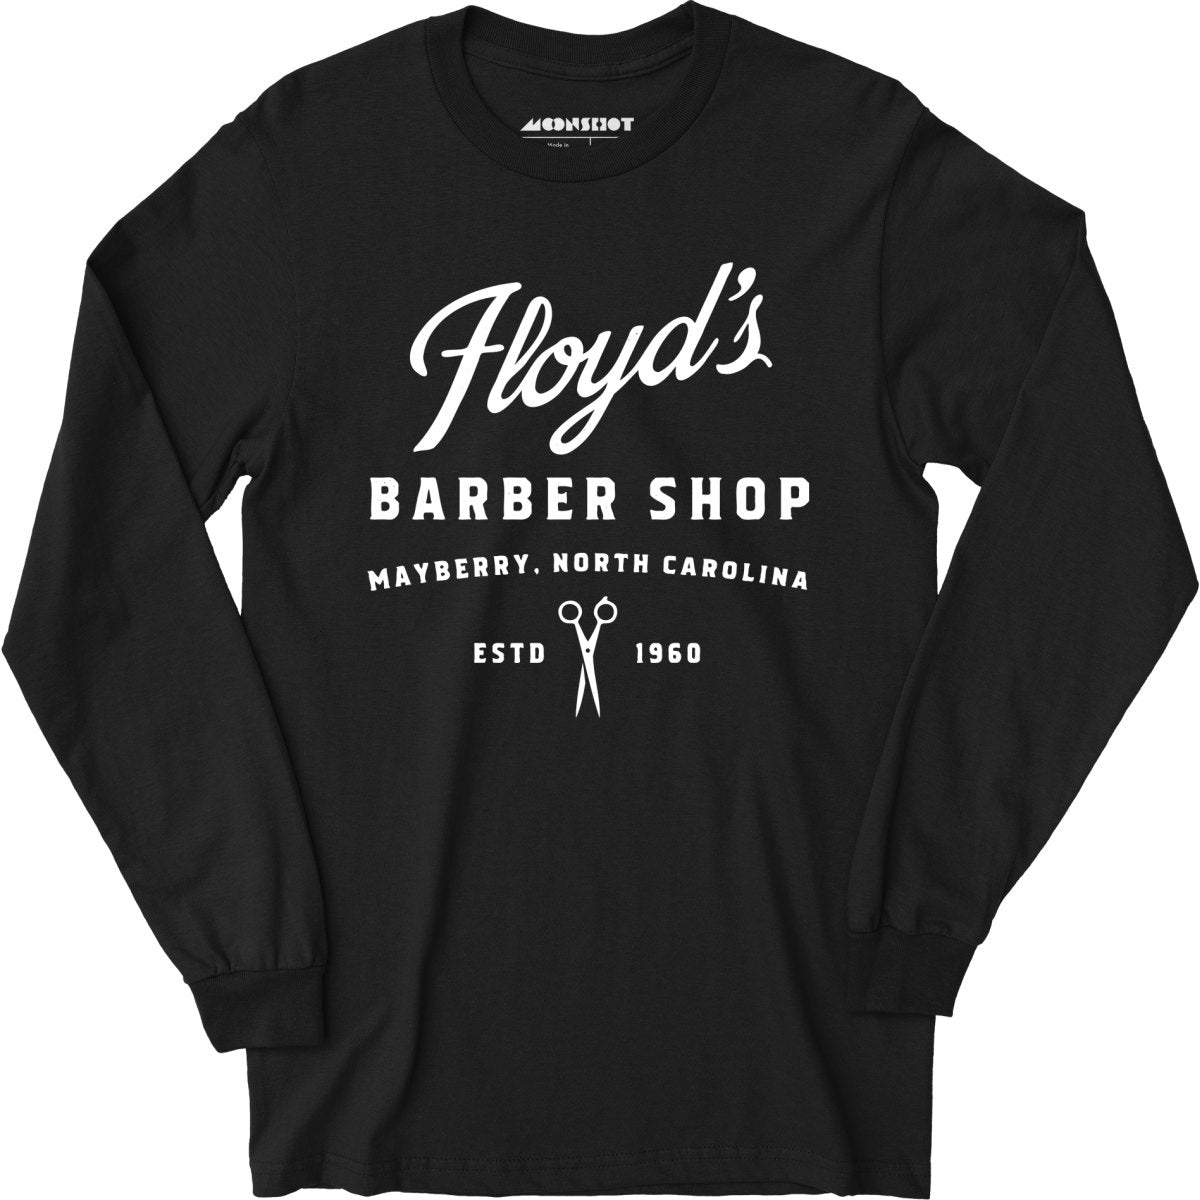 Floyd's Barber Shop - Mayberry - Long Sleeve T-Shirt